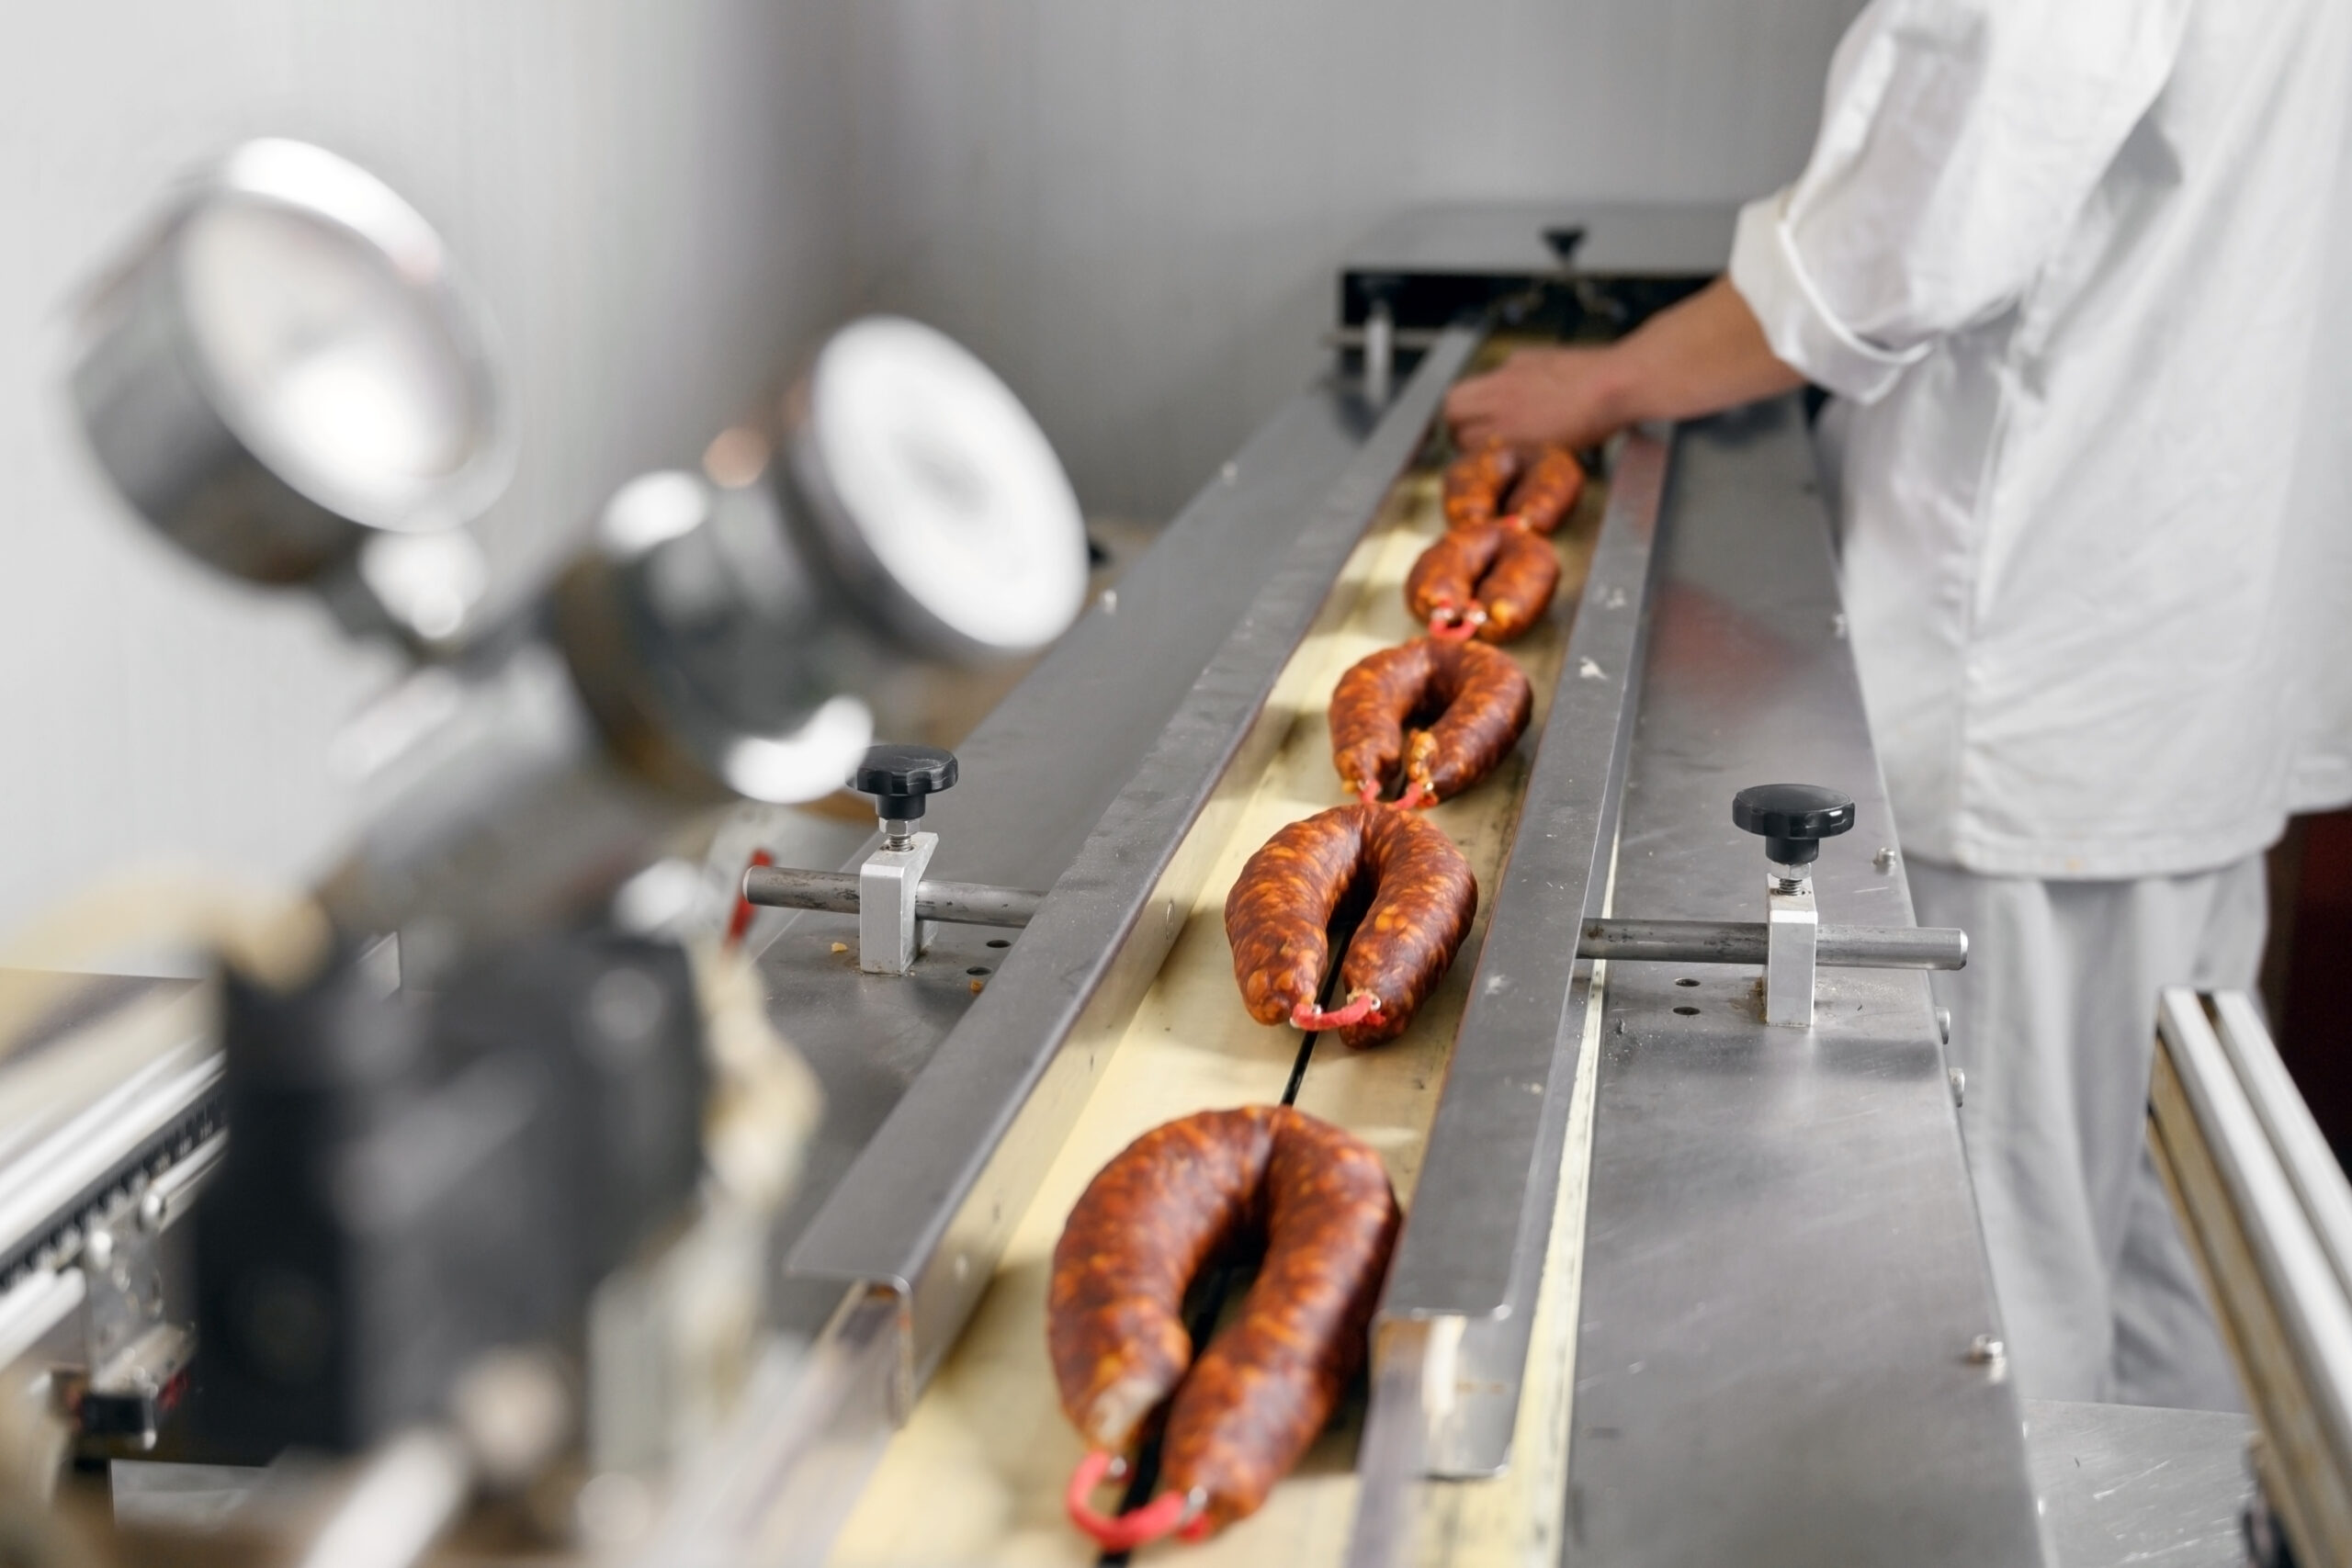 worker on an sausage that has had sodium nitrite added it it, assembly line at a meat packing facility